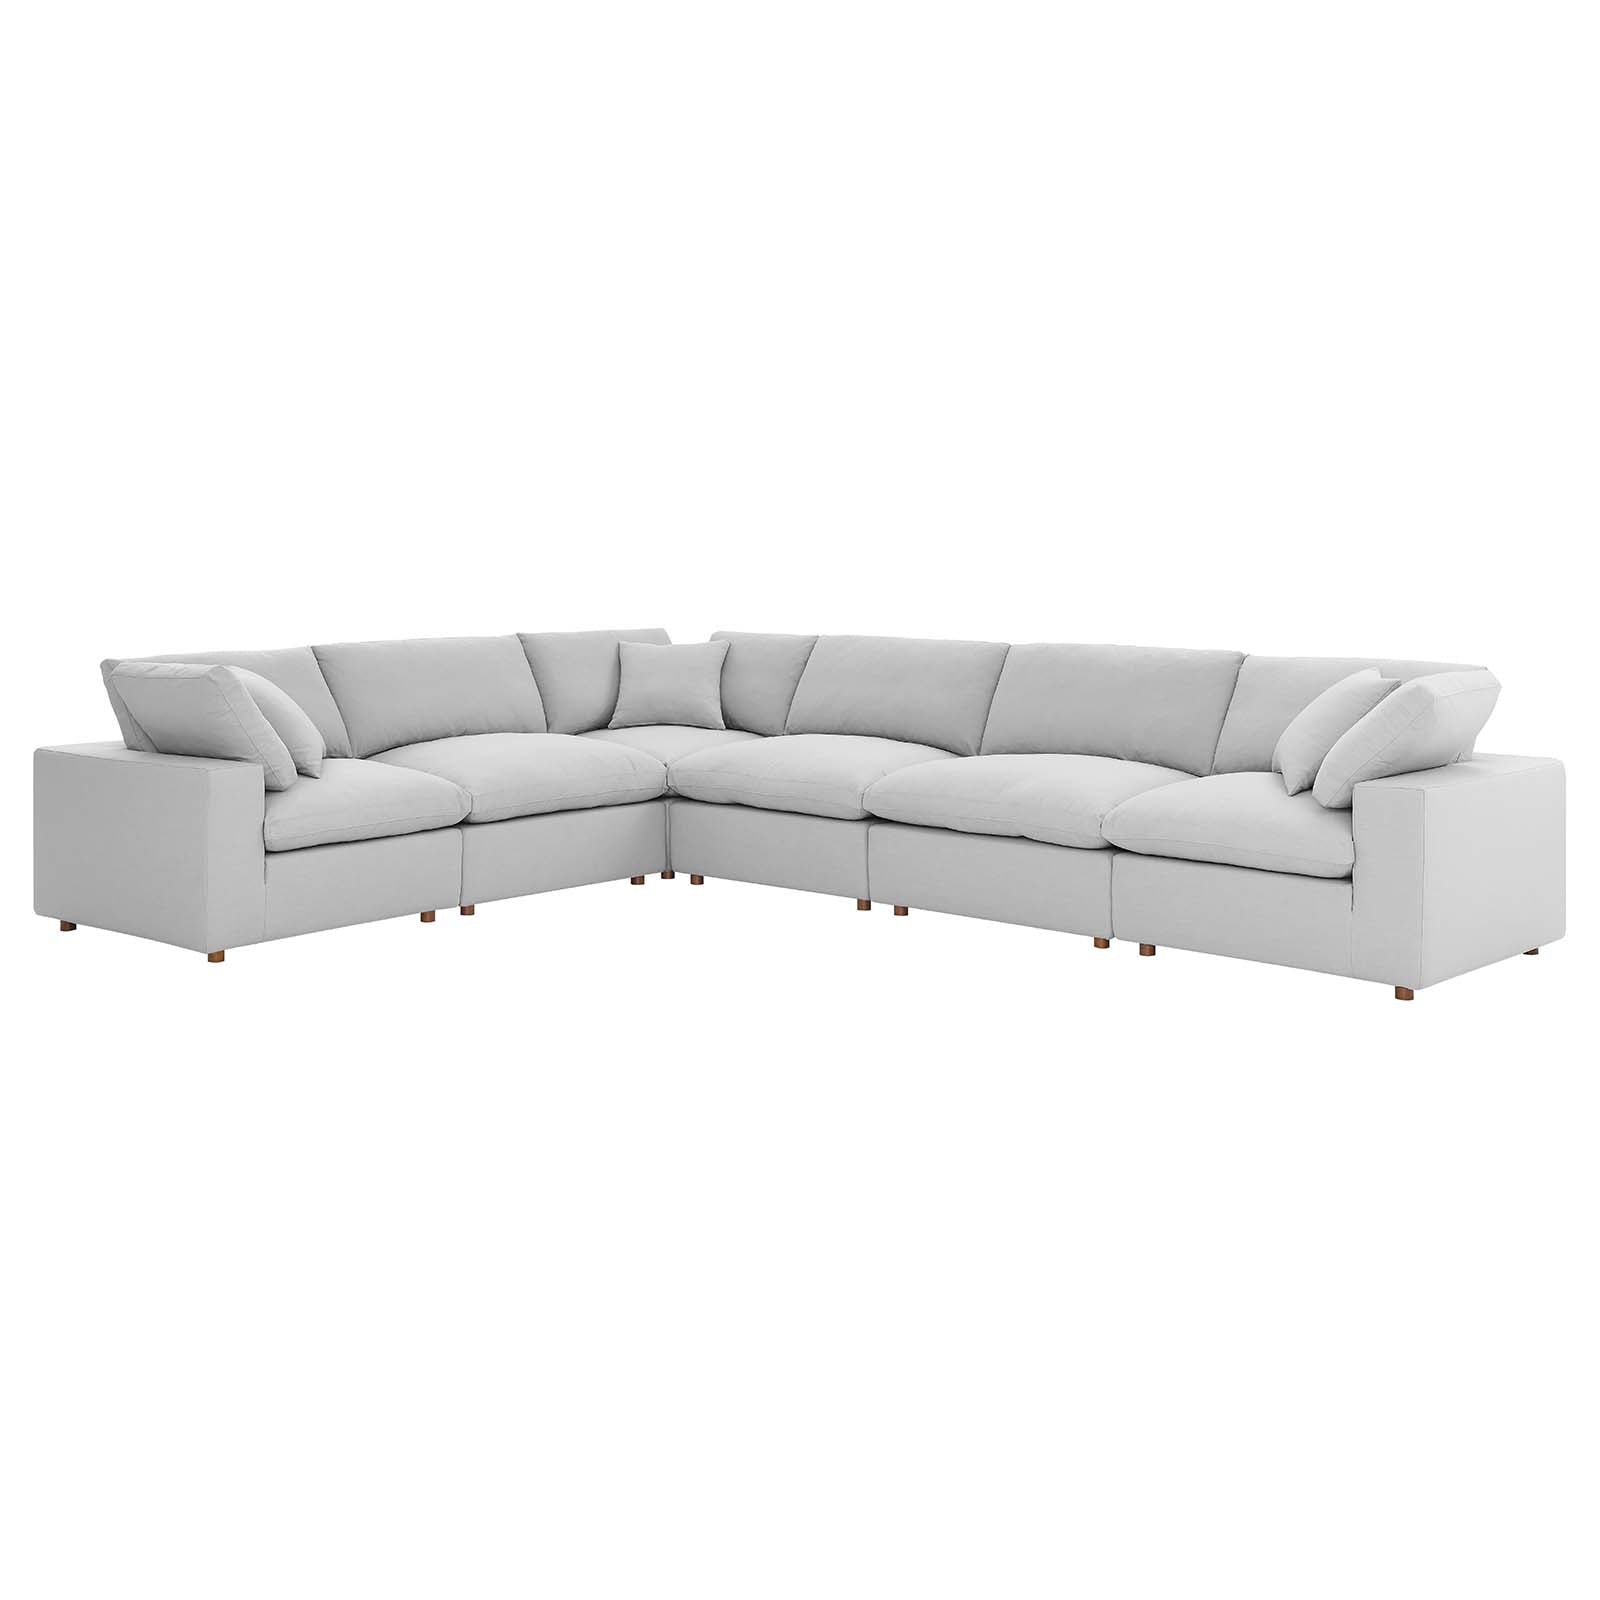 Commix Down Filled Overstuffed 6 Piece Sectional Sofa Set - East Shore Modern Home Furnishings